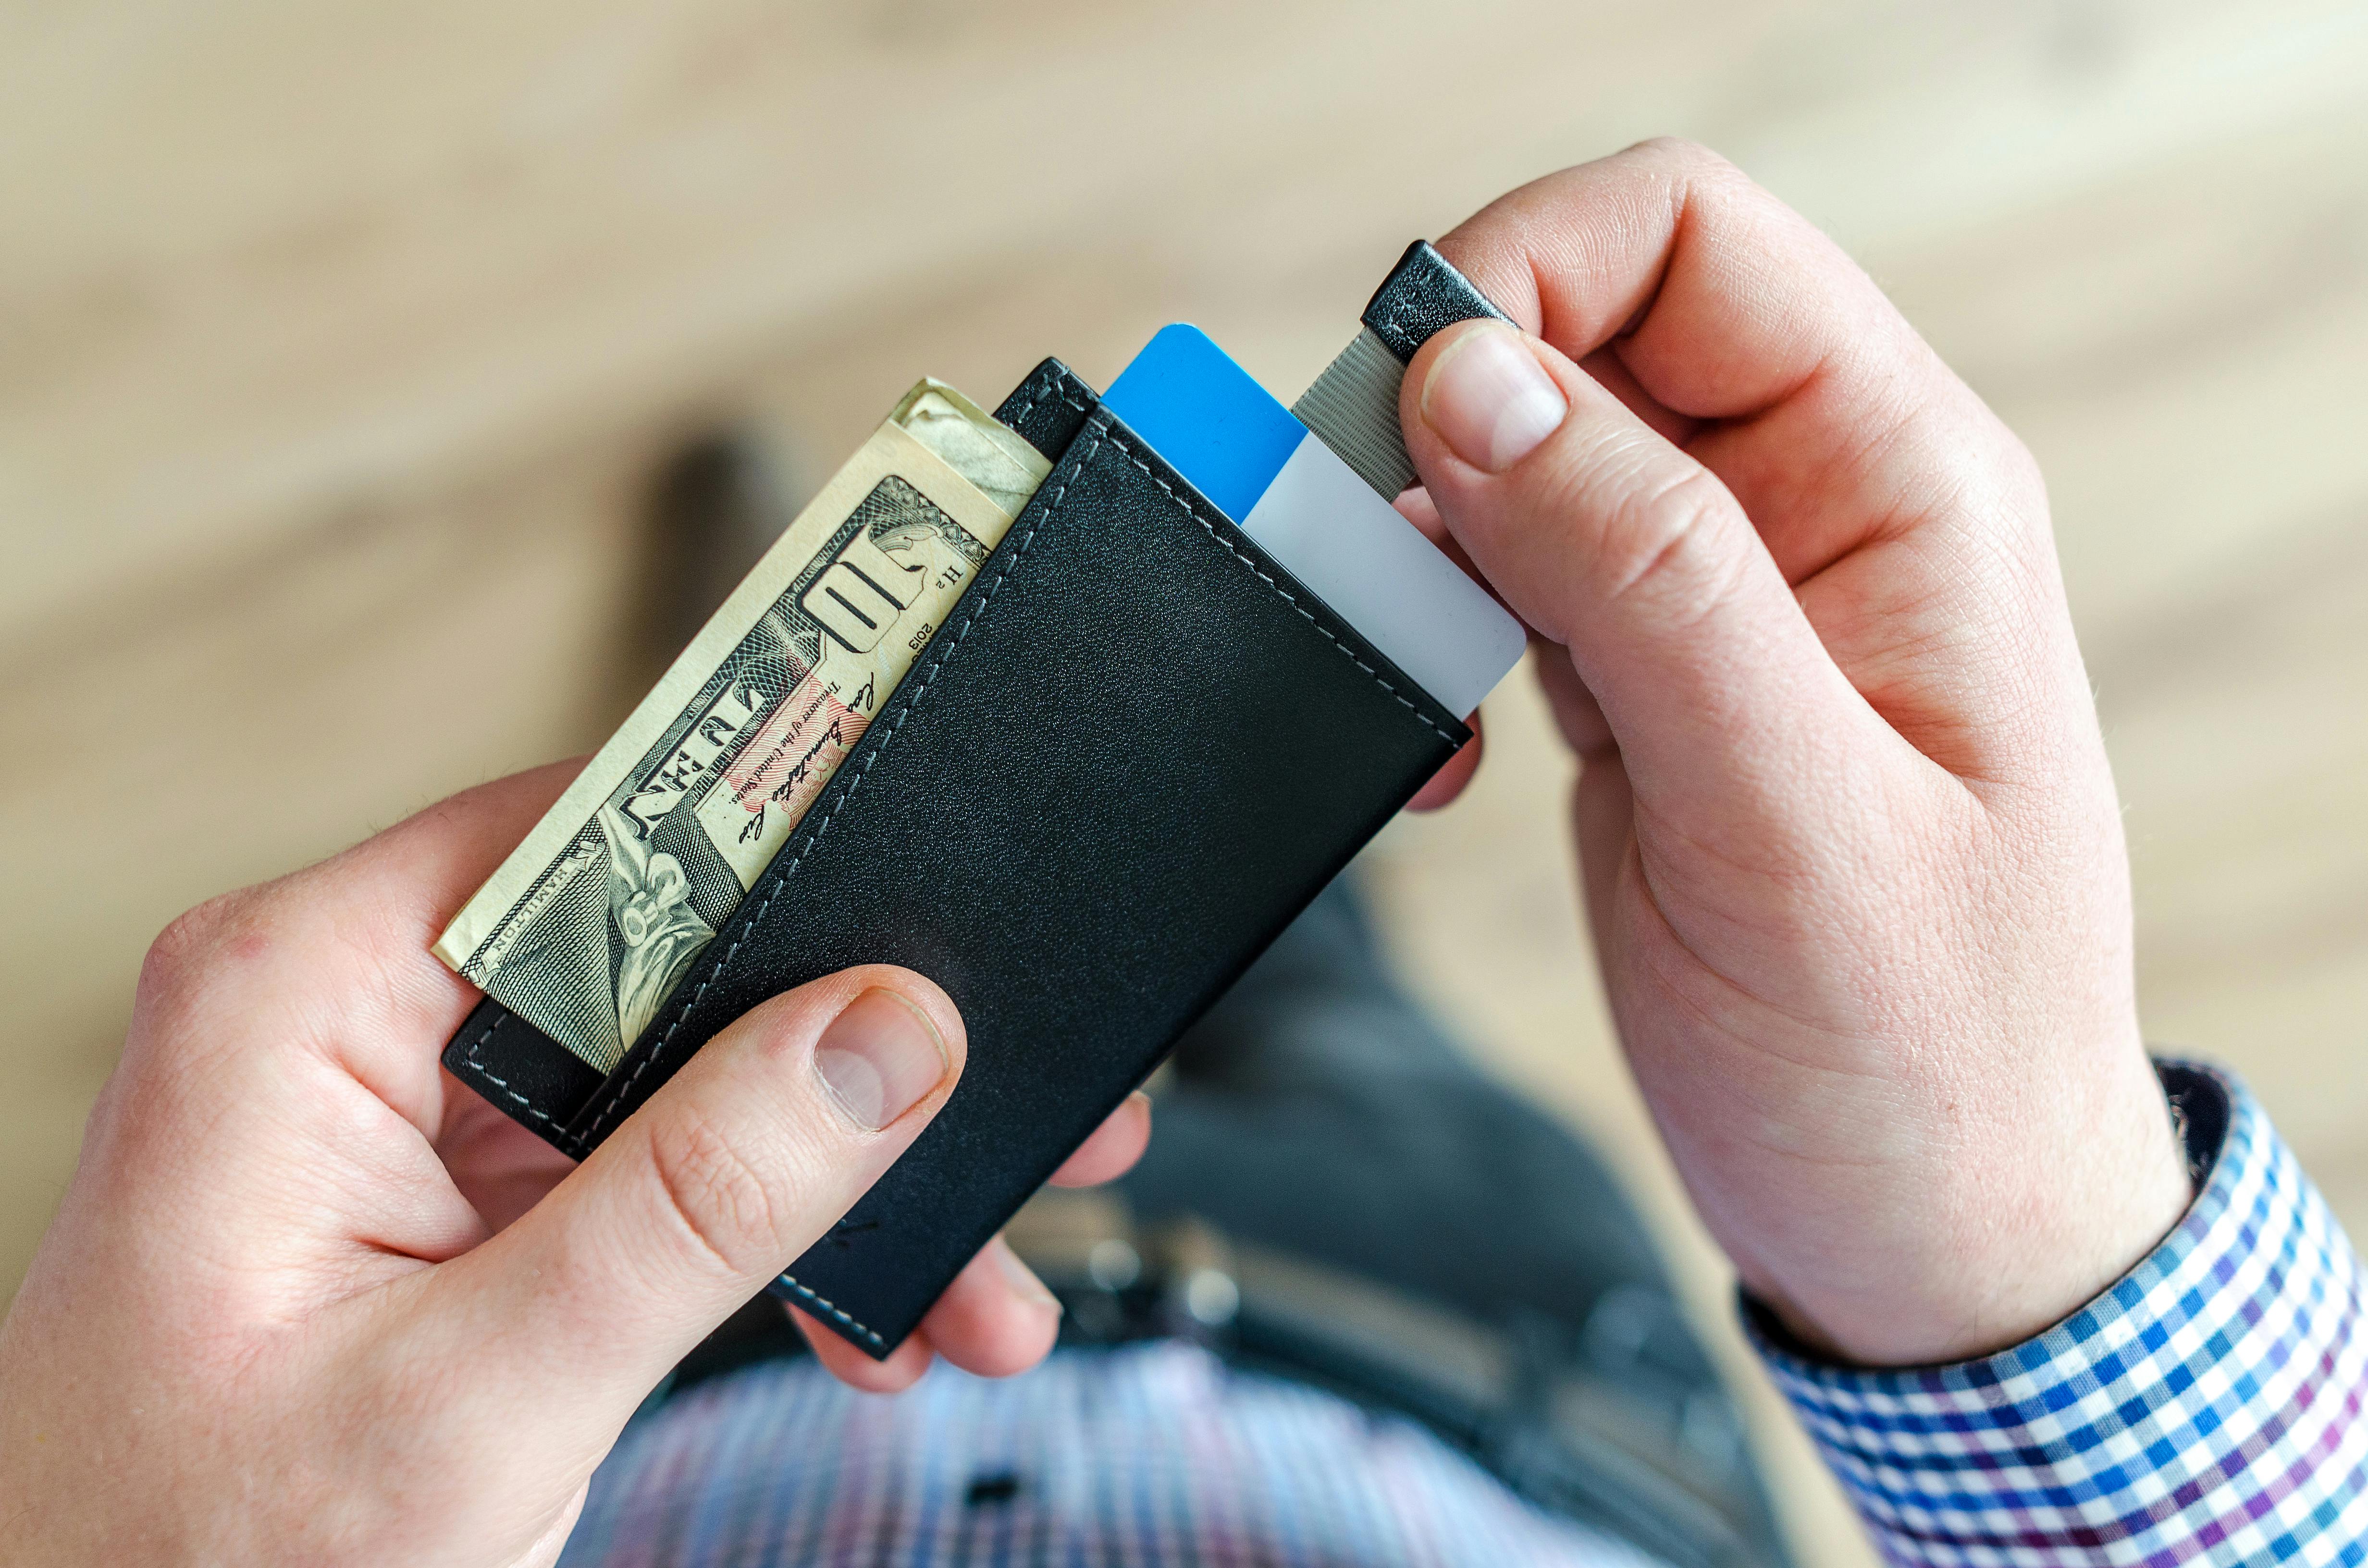 A man holding a wallet with bank cards and money | Source: Pexels